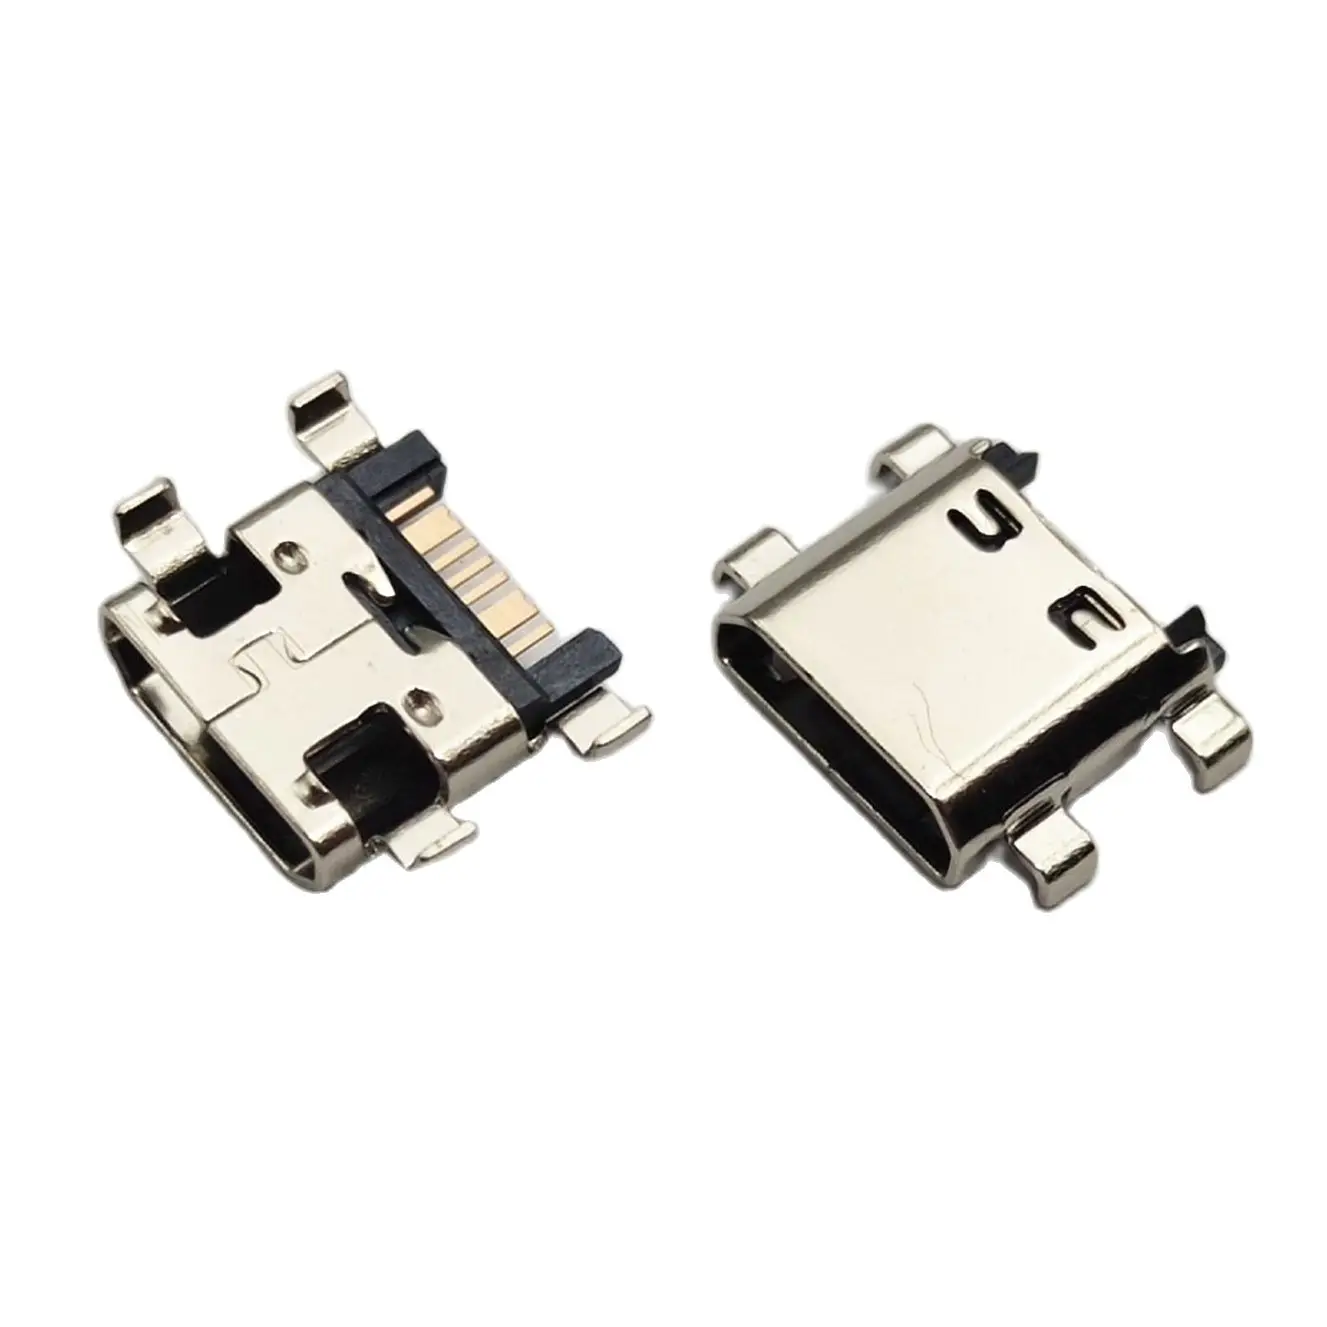 

100pcs Micro USB 7pin Connector Mobile Charging port tail plug For Samsung I8262 J5 Prime On5 G5700 J7 G6100 G530 G532 J2 G3502